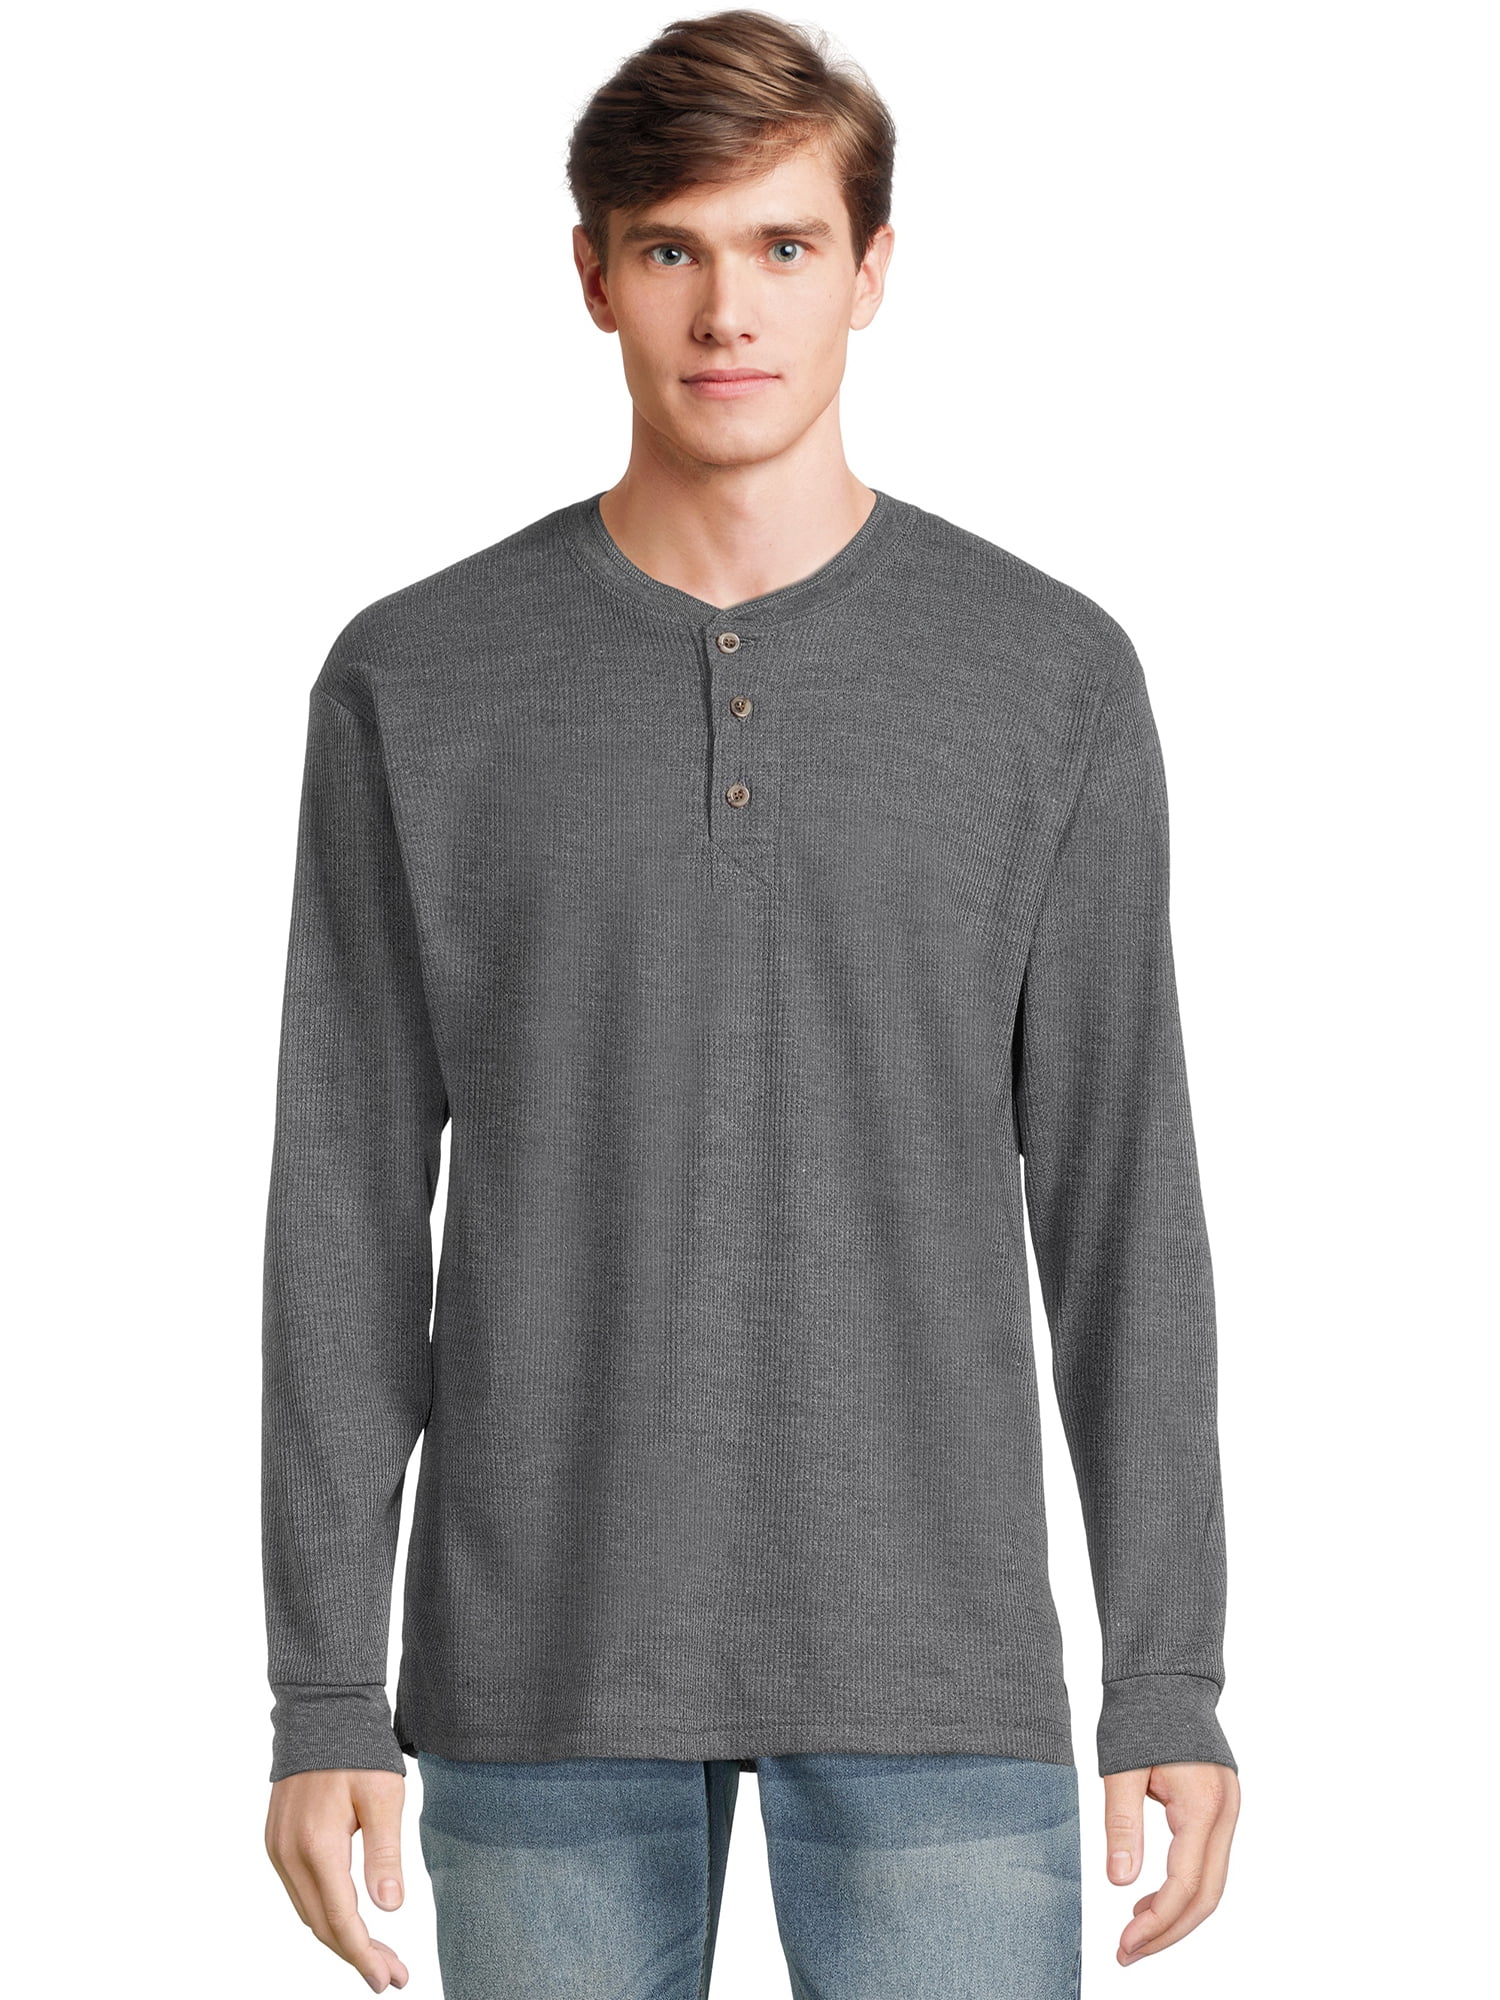 Smith & Eagle Men's Heavyweight Thermal Henley Shirt with Long Sleeves 